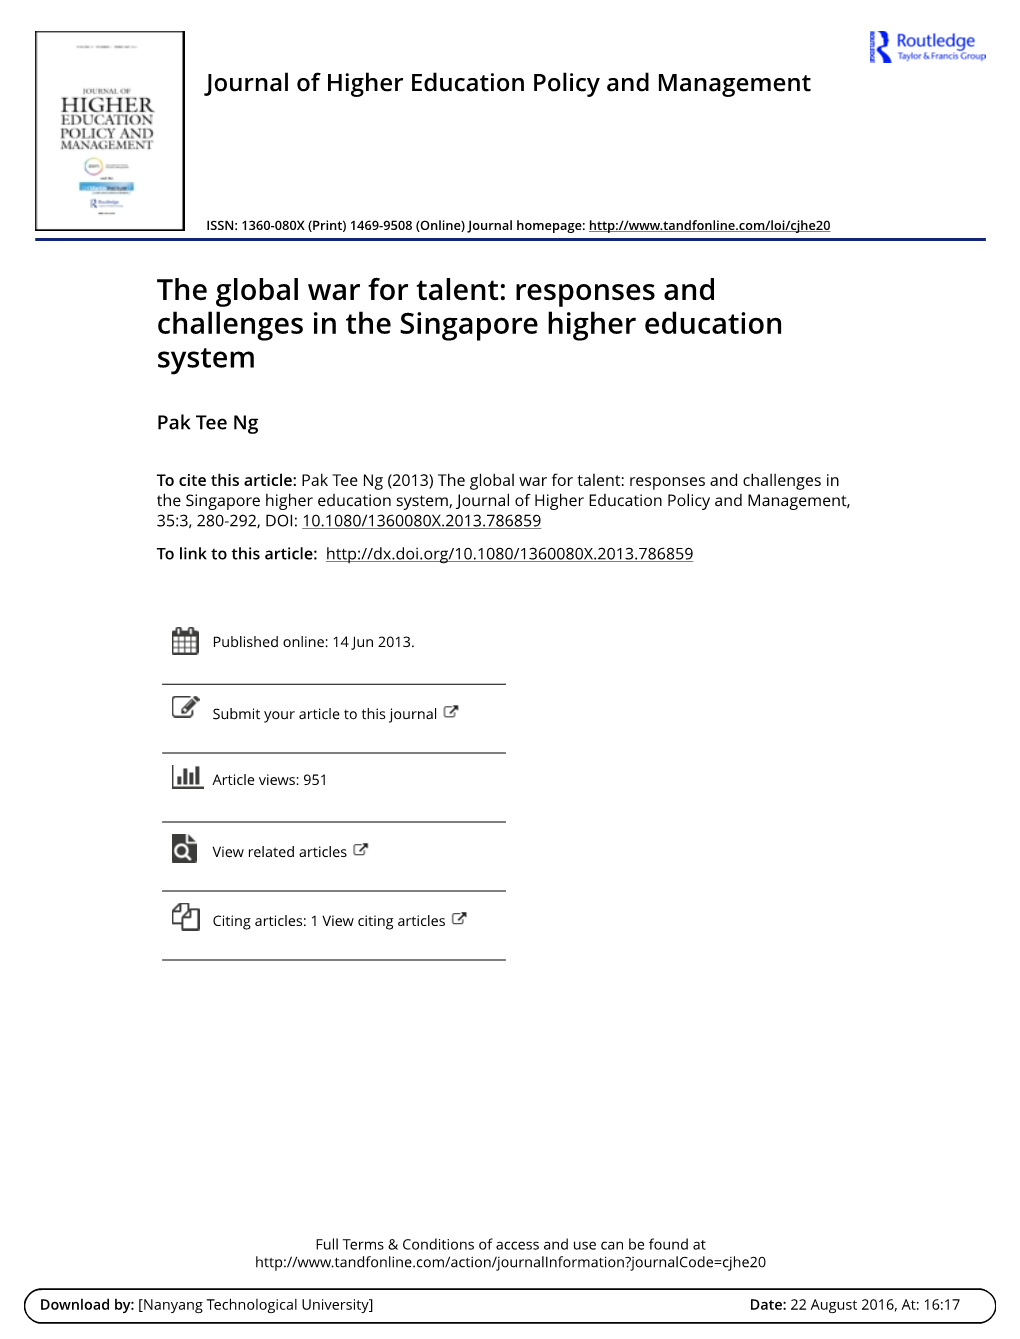 Responses and Challenges in the Singapore Higher Education System